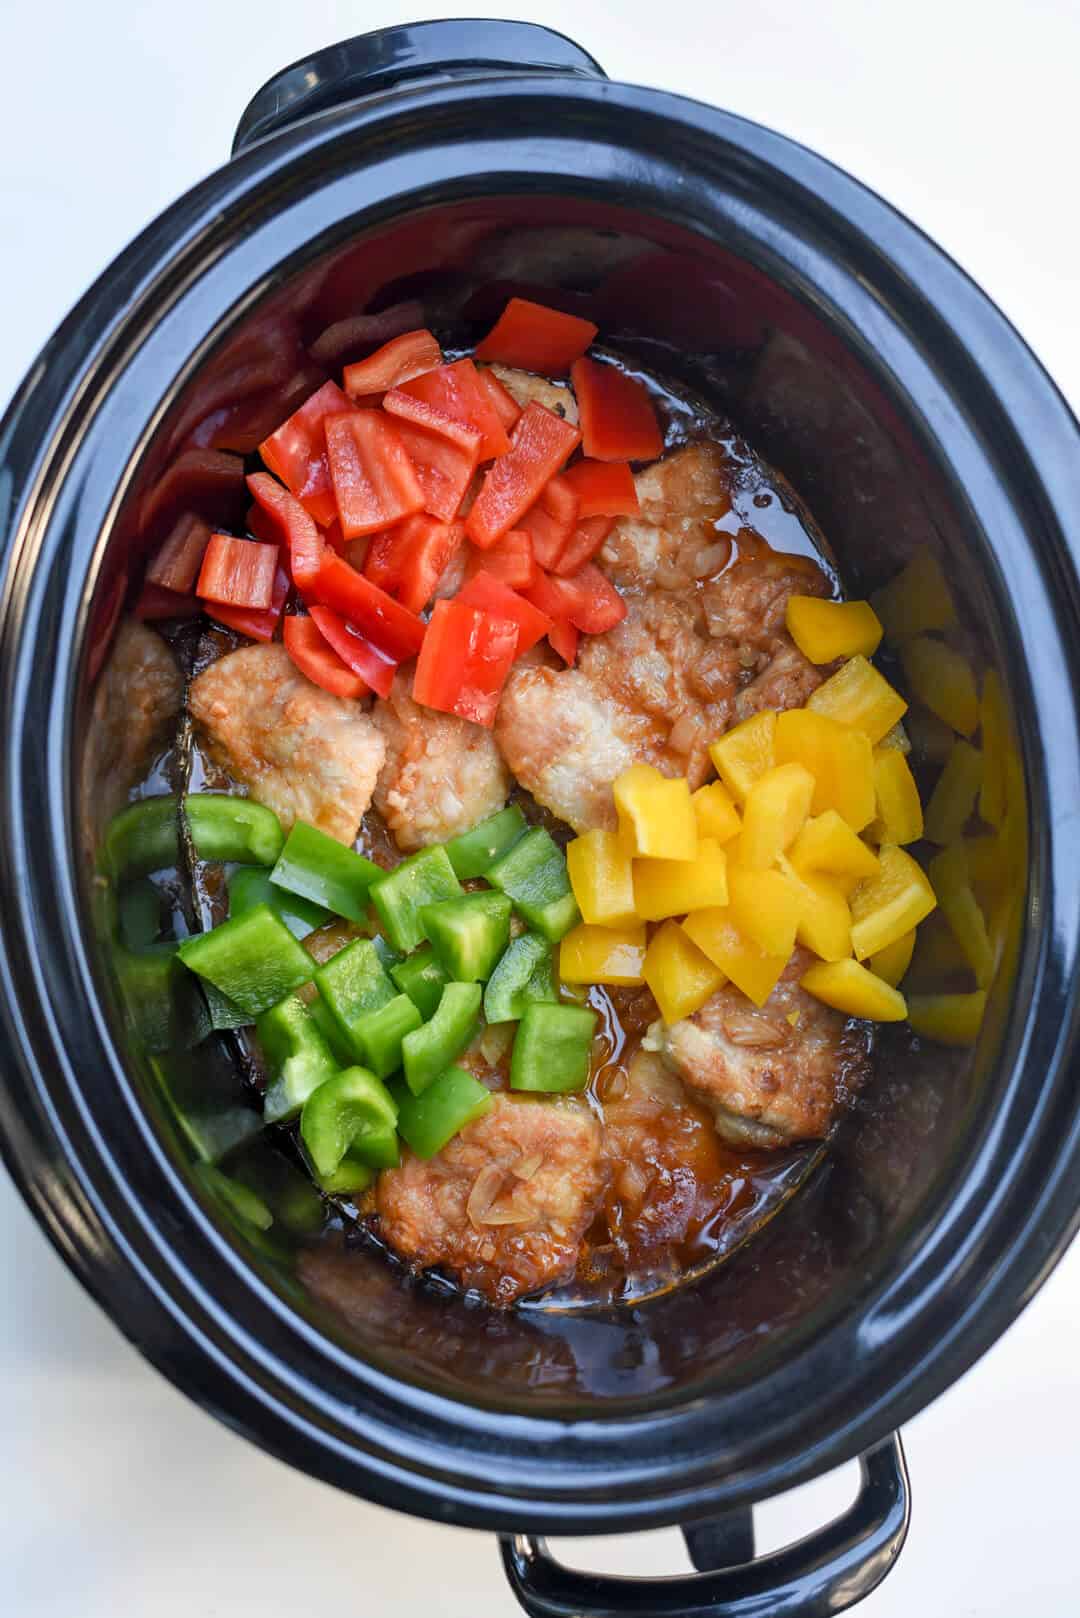 Colorful bell peppers are added to the slow cooker.